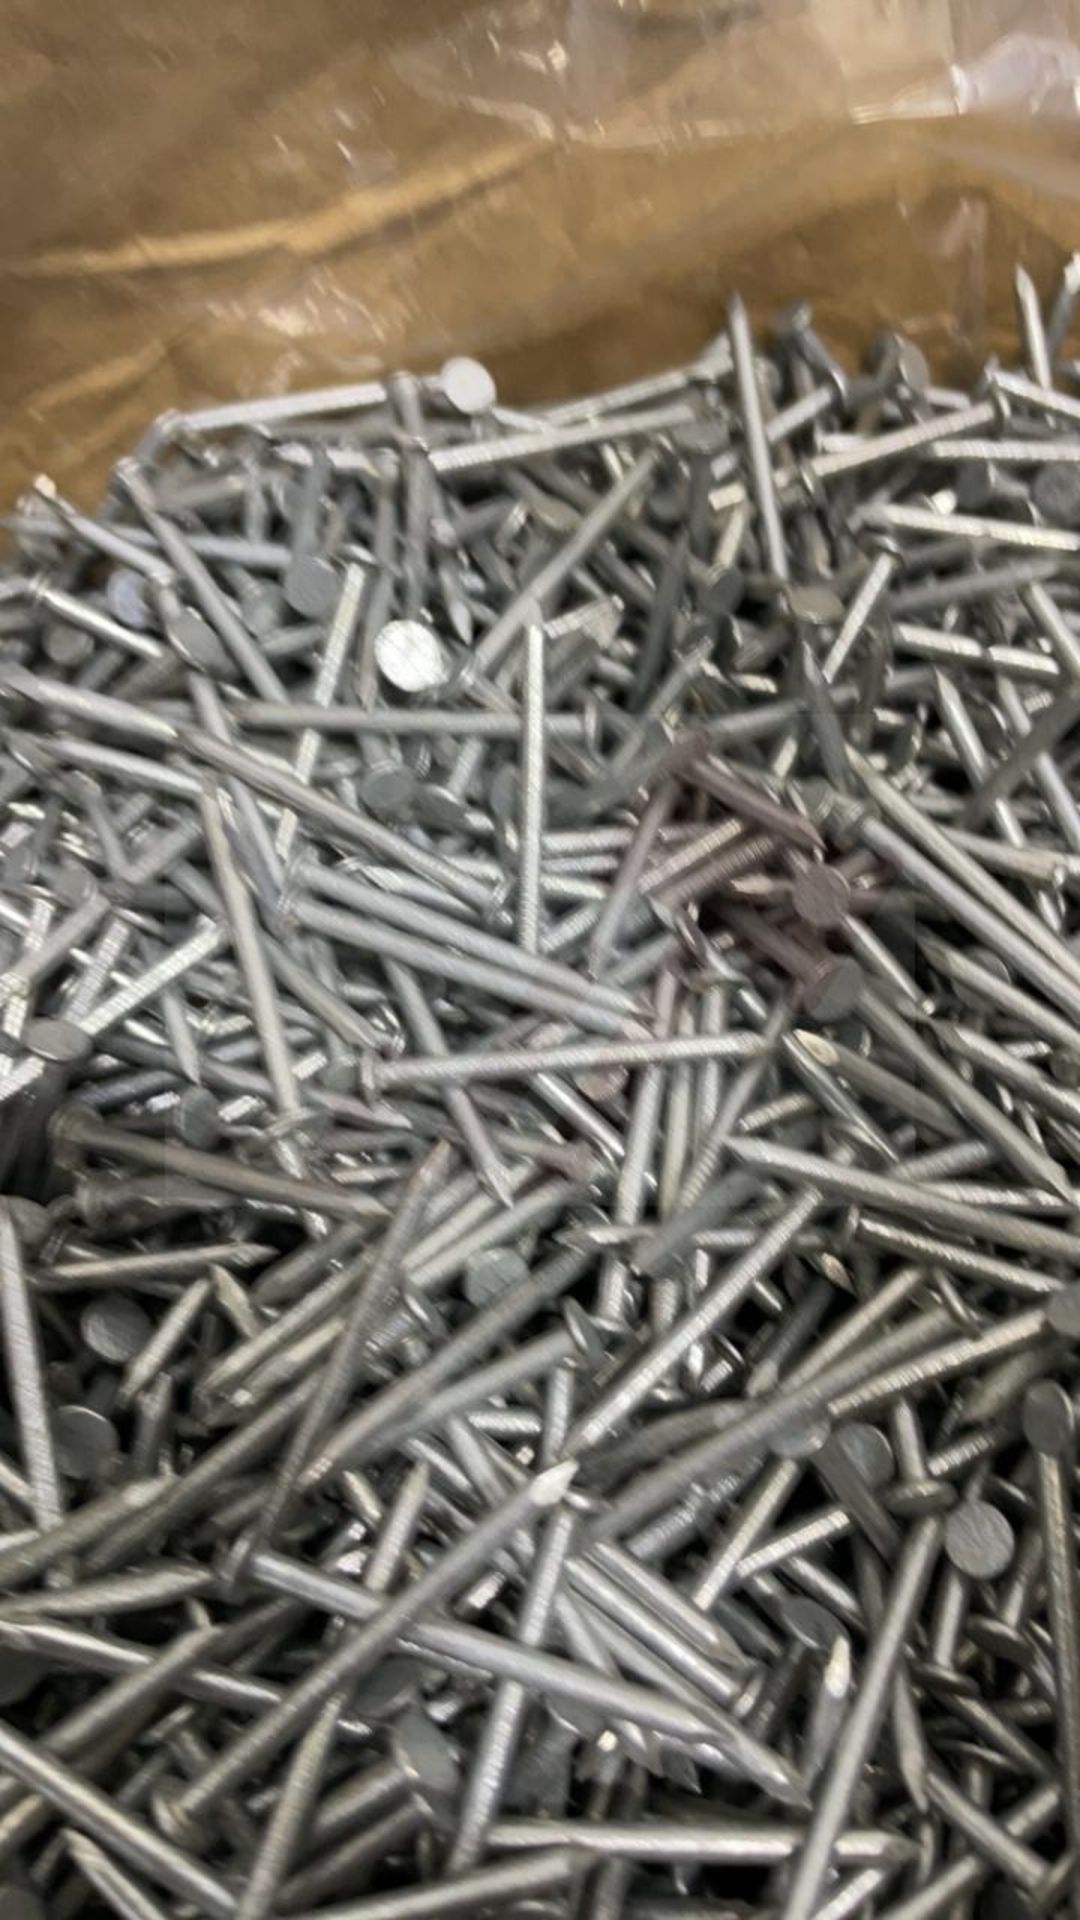 Box of nails | 40mm | Galvanised - Image 2 of 4